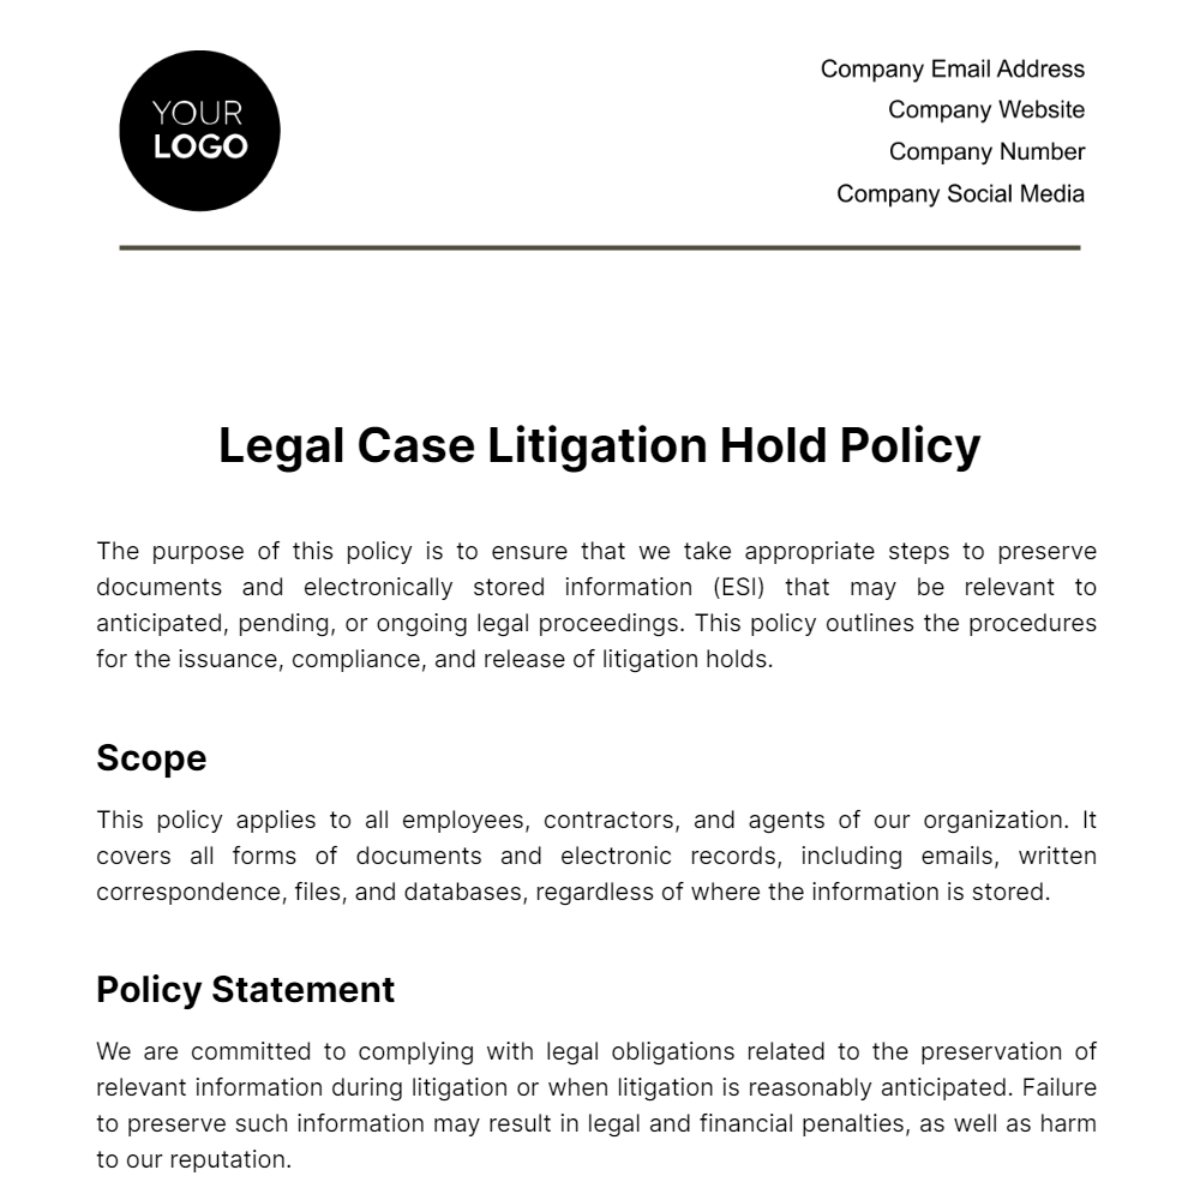 Free Legal Case Litigation Hold Policy Template